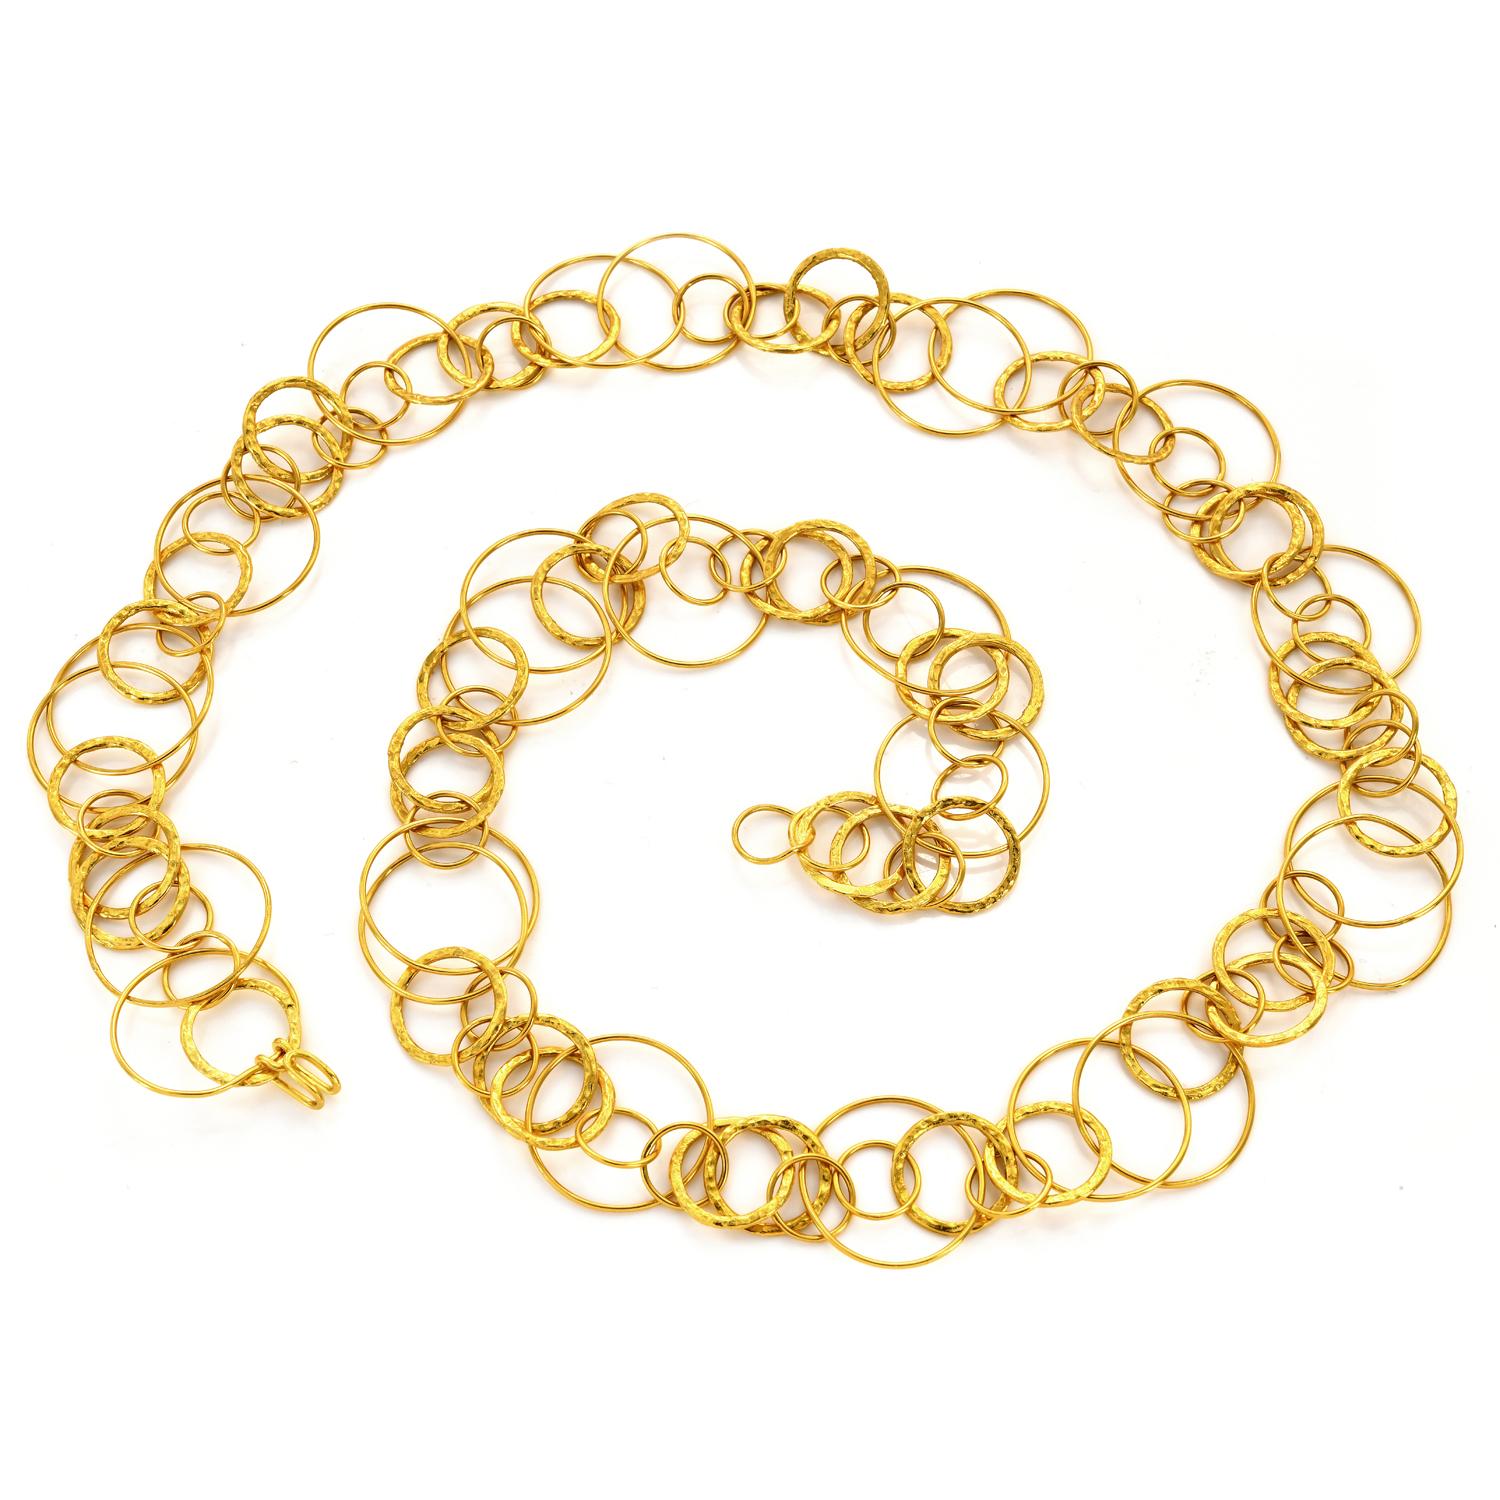 Spitzer & Furman 18k Yellow Gold Multi Hoop Round Link Chain Necklace In Excellent Condition For Sale In Miami, FL